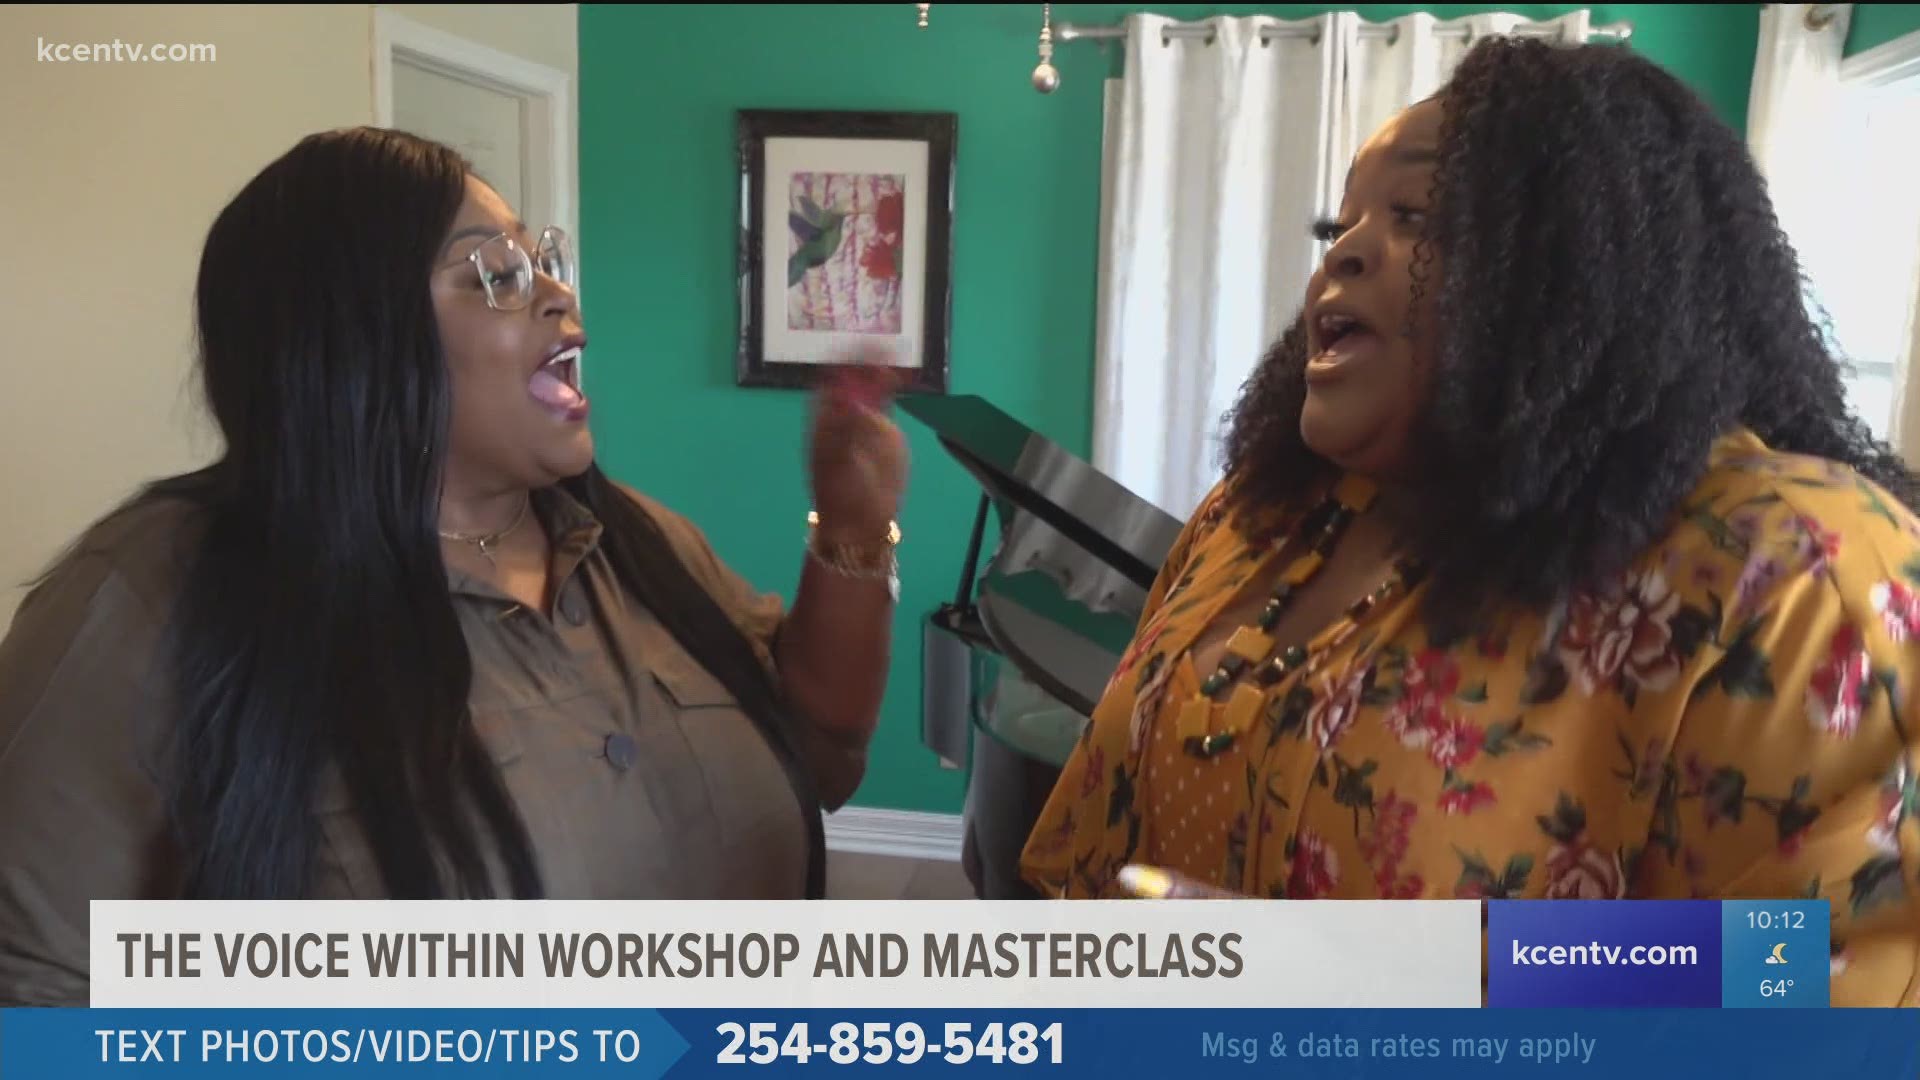 The 'Voice Within Volume Two Workshop and Masterclass' will be held May 1, at Tap Tap Art School in Harker Heights.